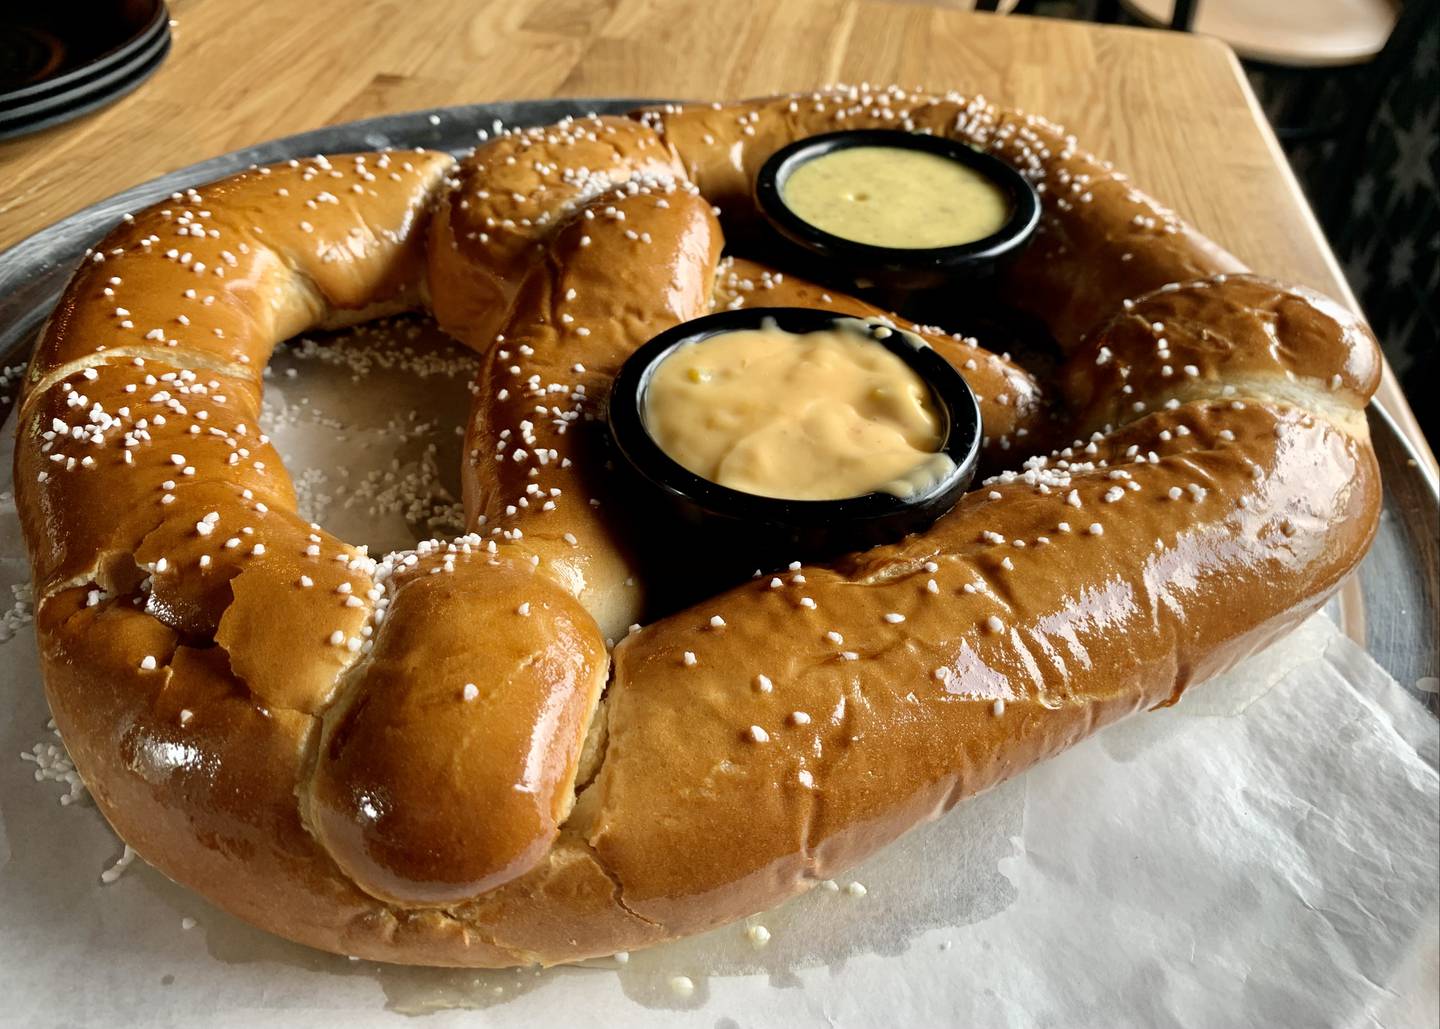 The freshly baked Bavarian pretzel at Dakotas is an appetizer that must be shared.  The pretzel is over a foot in diameter and comes with honey mustard sauces and pickled jalapeno cheese.